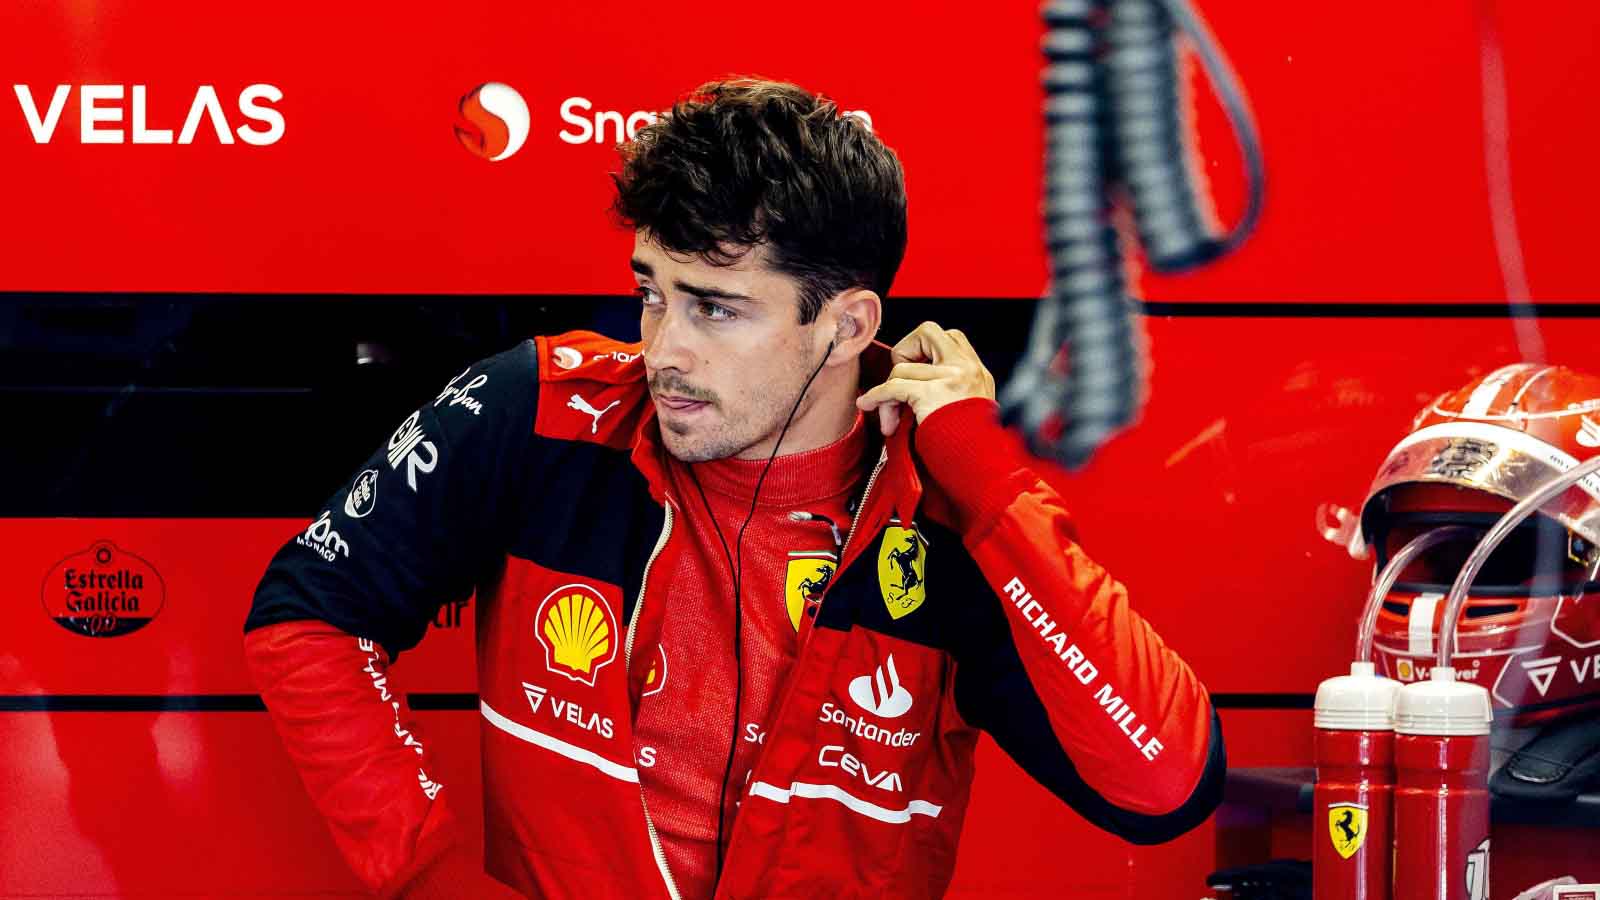 Charles Leclerc adjusts his race suit. Hungary July 2022.